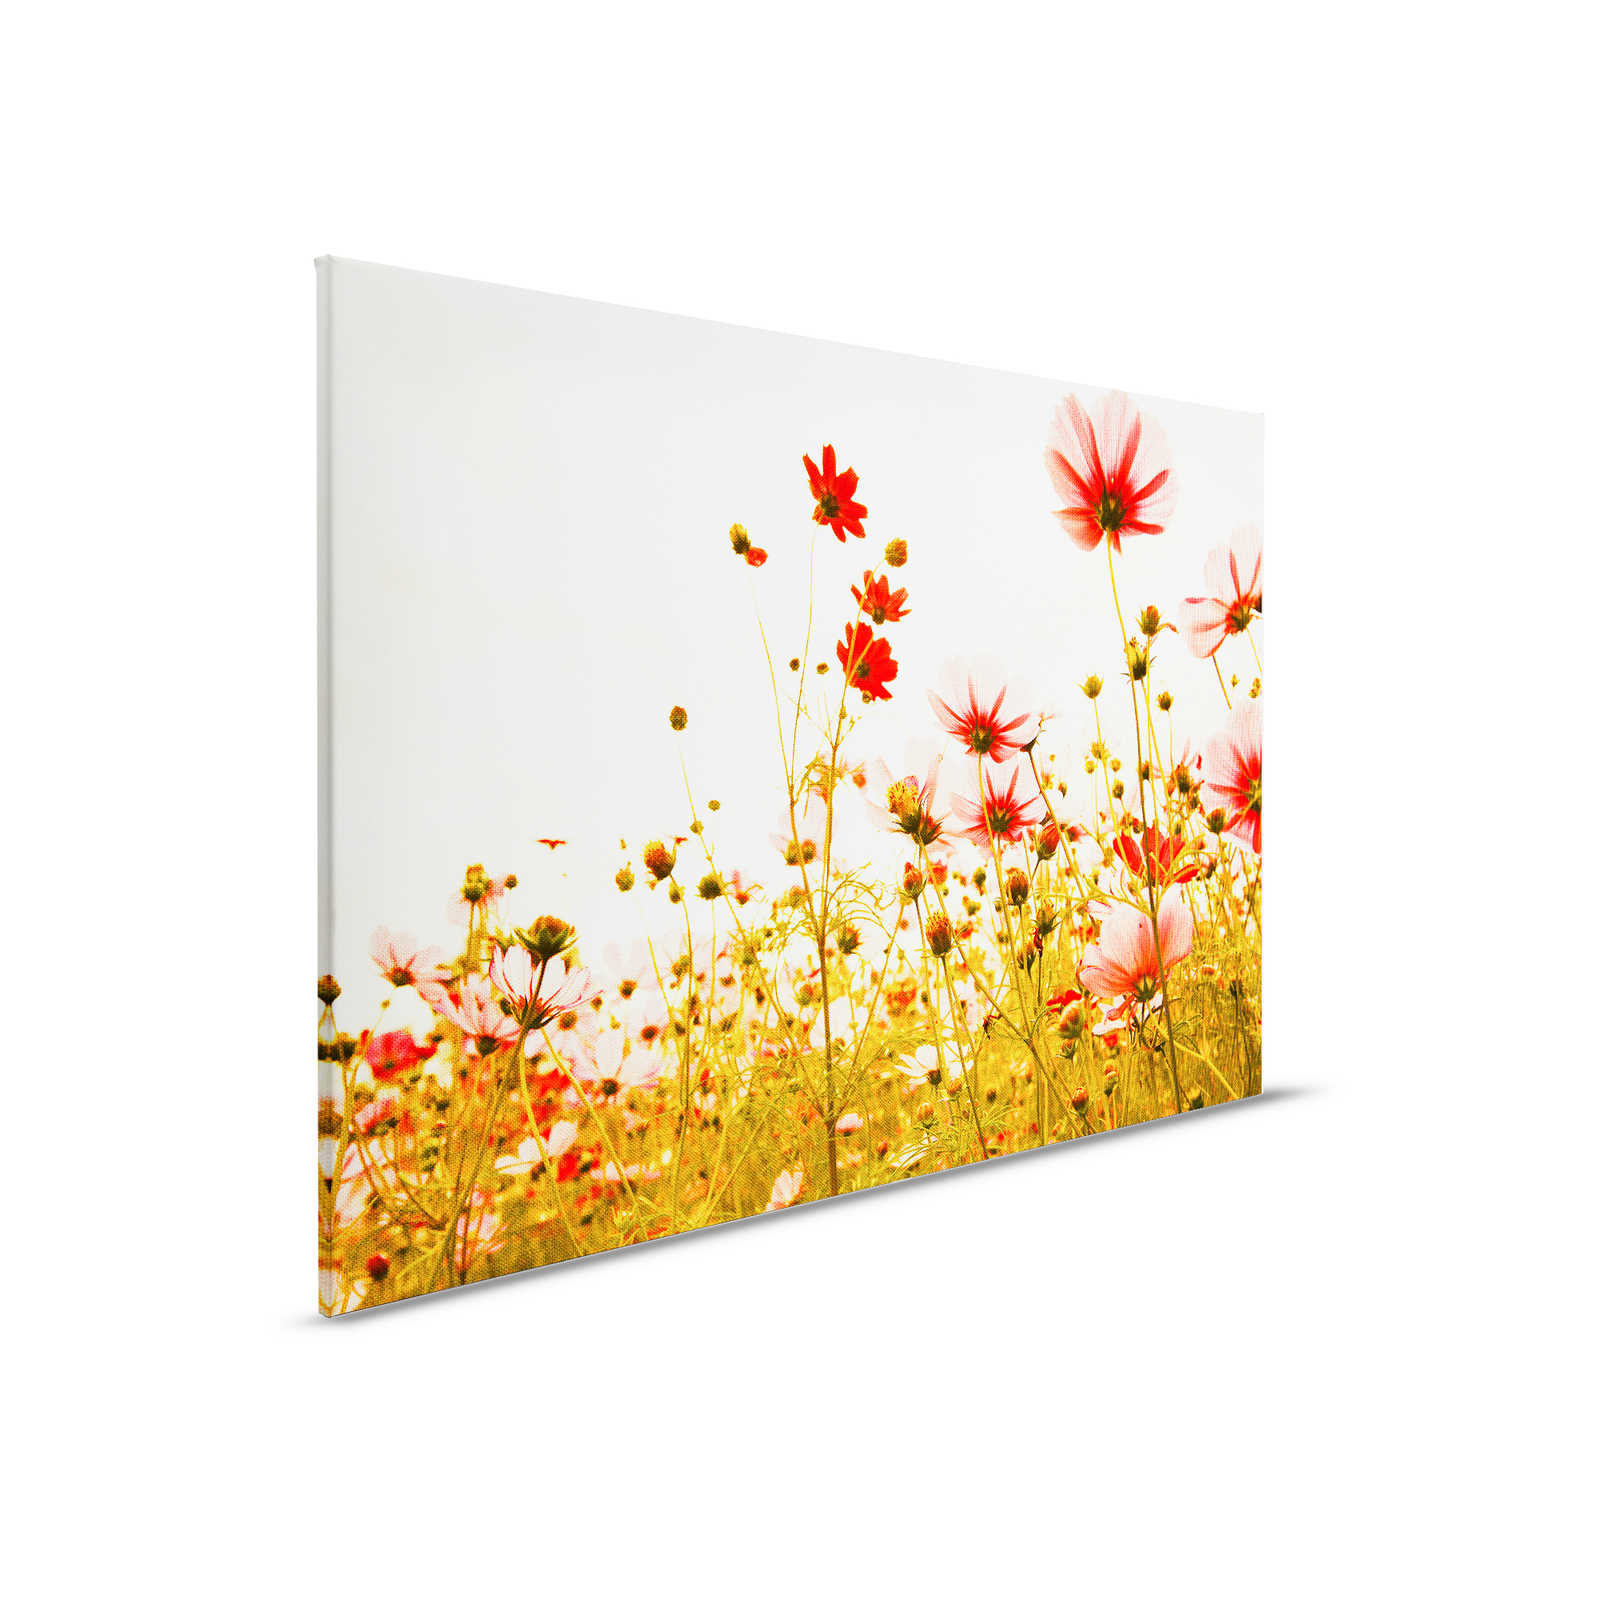         Canvas with flower meadow in spring | green, pink, white - 0.90 m x 0.60 m
    